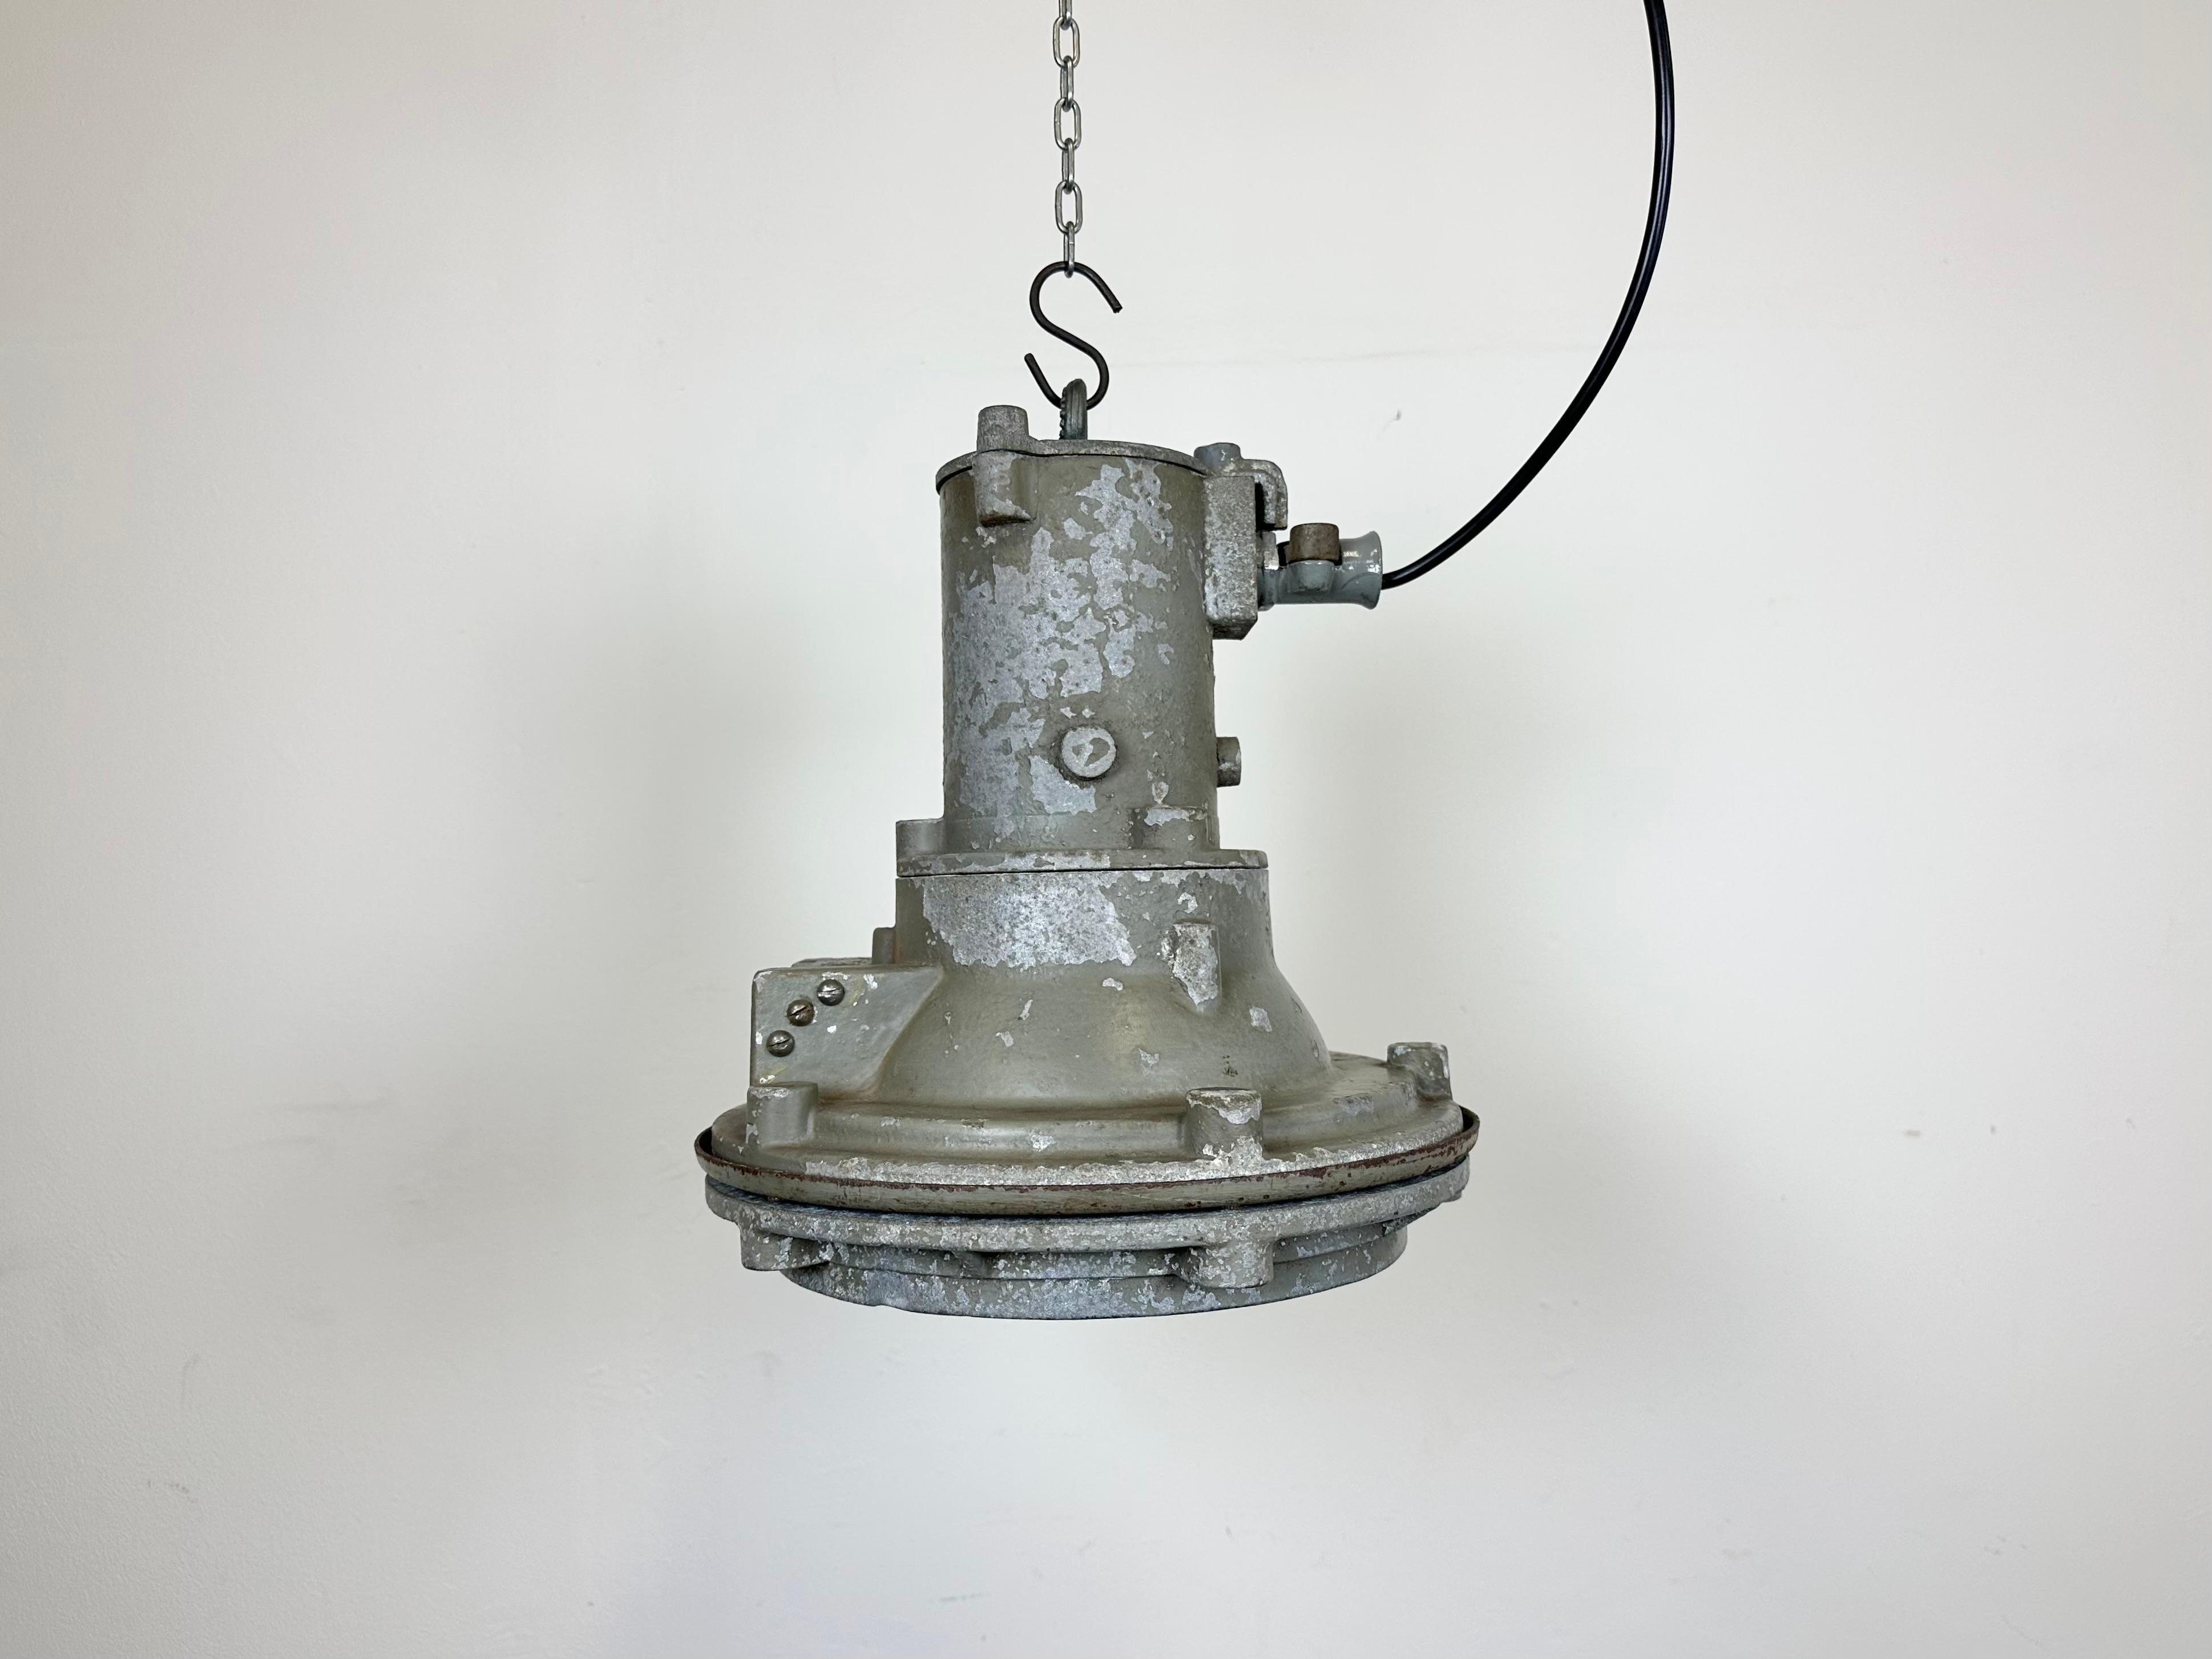 Industrial factory hanging lamp made in former Czechoslovakia during the 1960s. It features a cast aluminium body and a lens glass cover .The porcelain socket requires standard E 27/ E 26 lightbulbs. New wire. The weight of the lamp is 9 kg.The